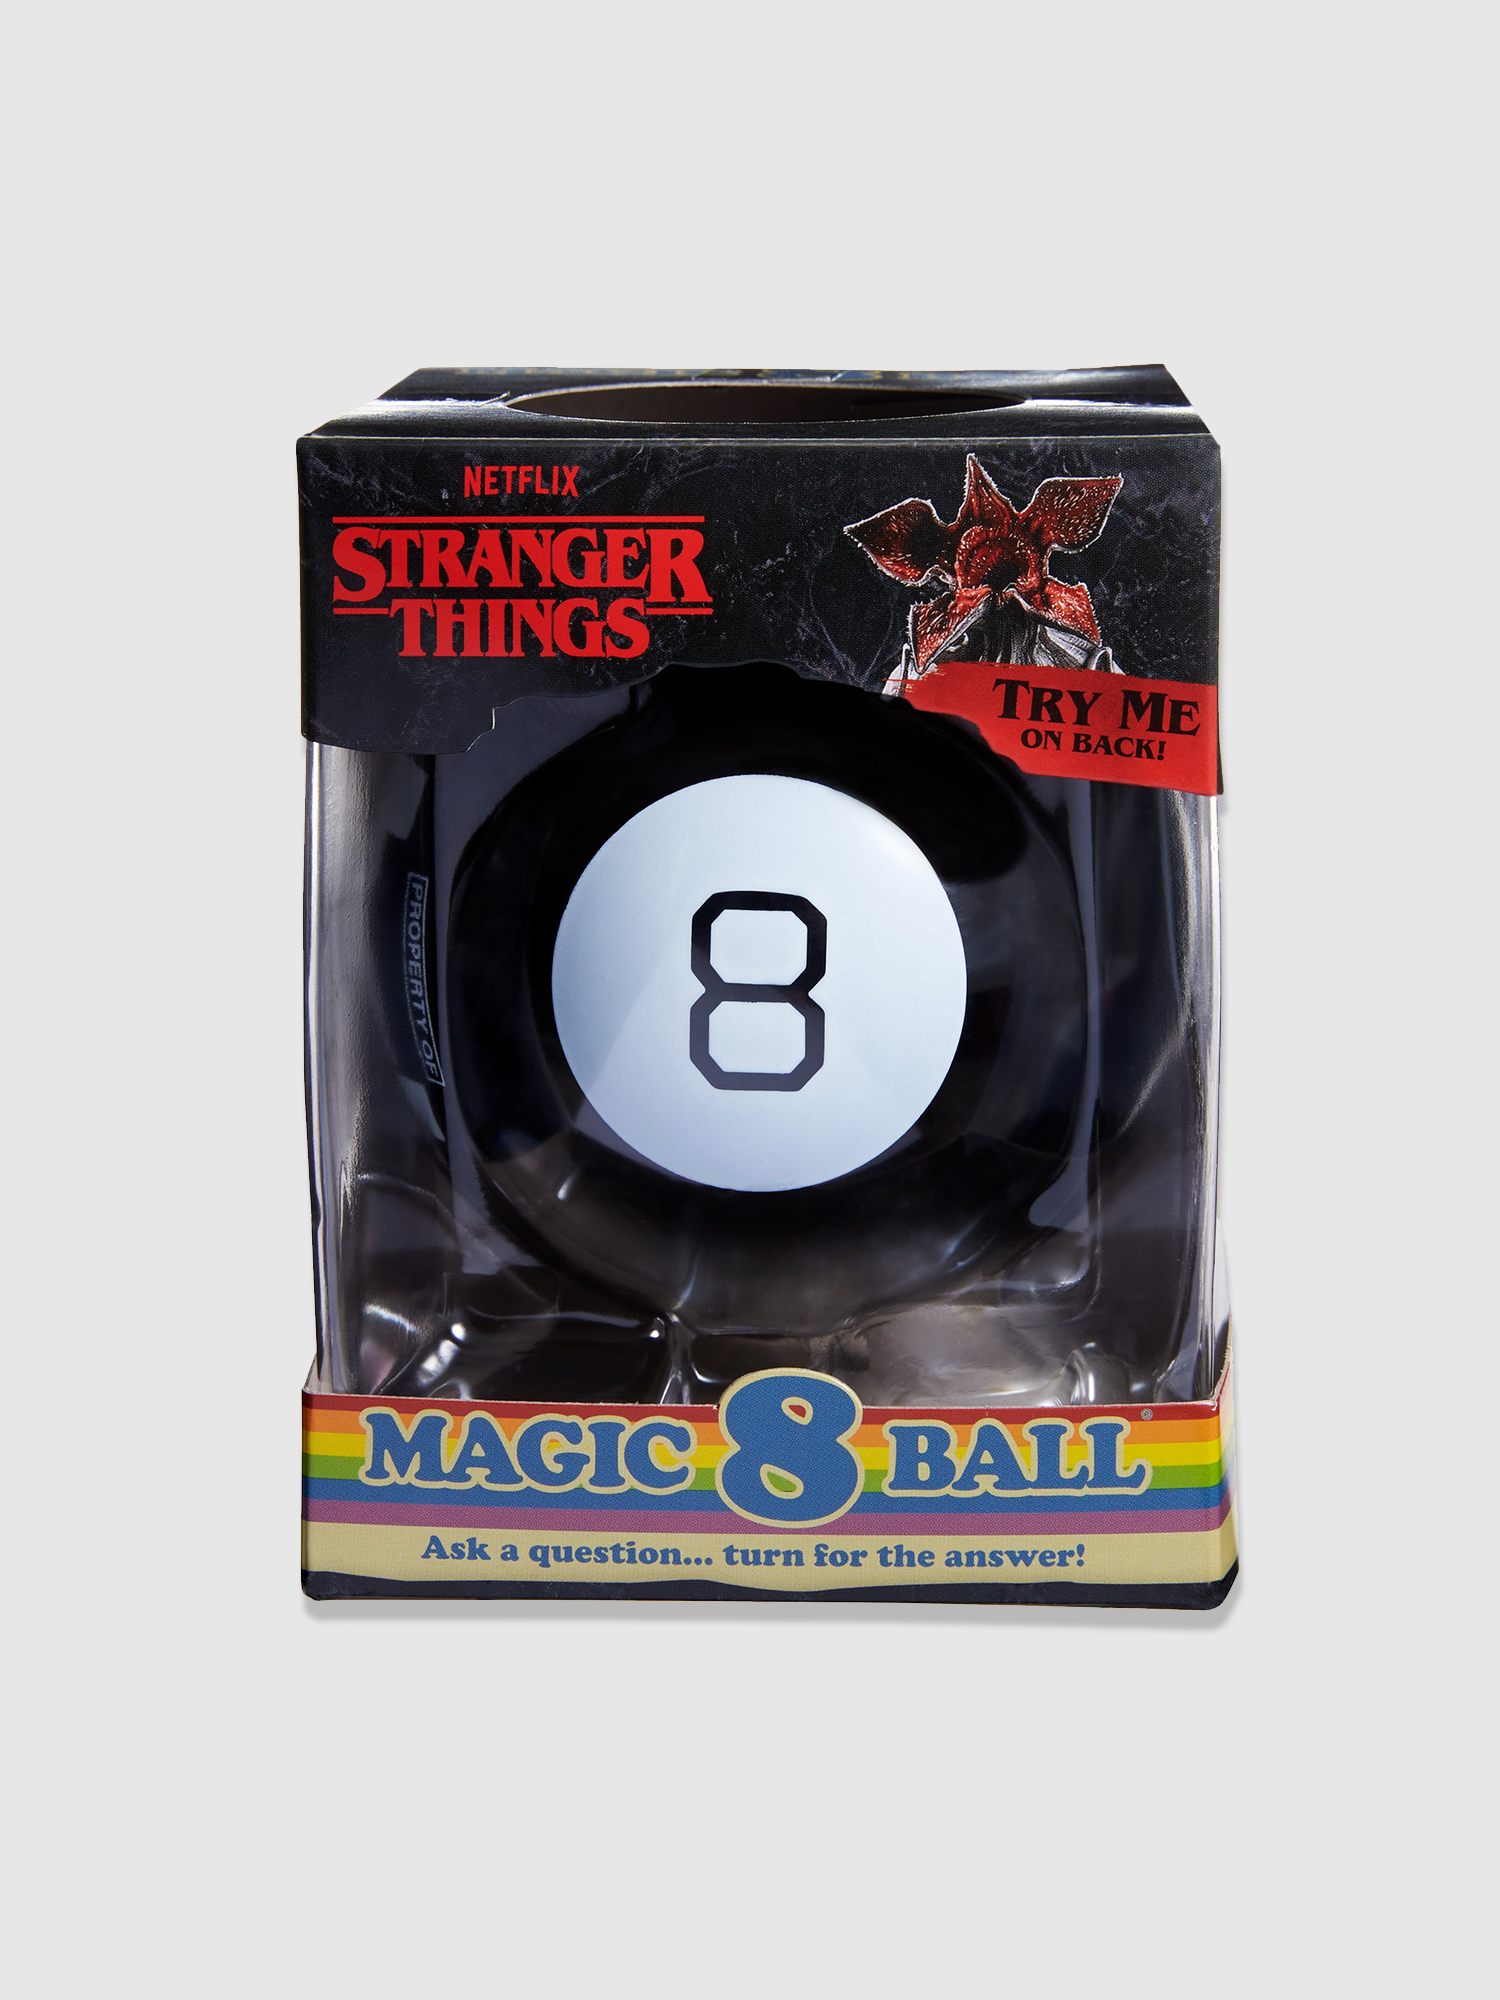 LOT OF 2 MAGIC ORB BALL EIGHT 8 BALL ANSWERS QUESTIONS CLASSIC PARTY GAME  BALLS